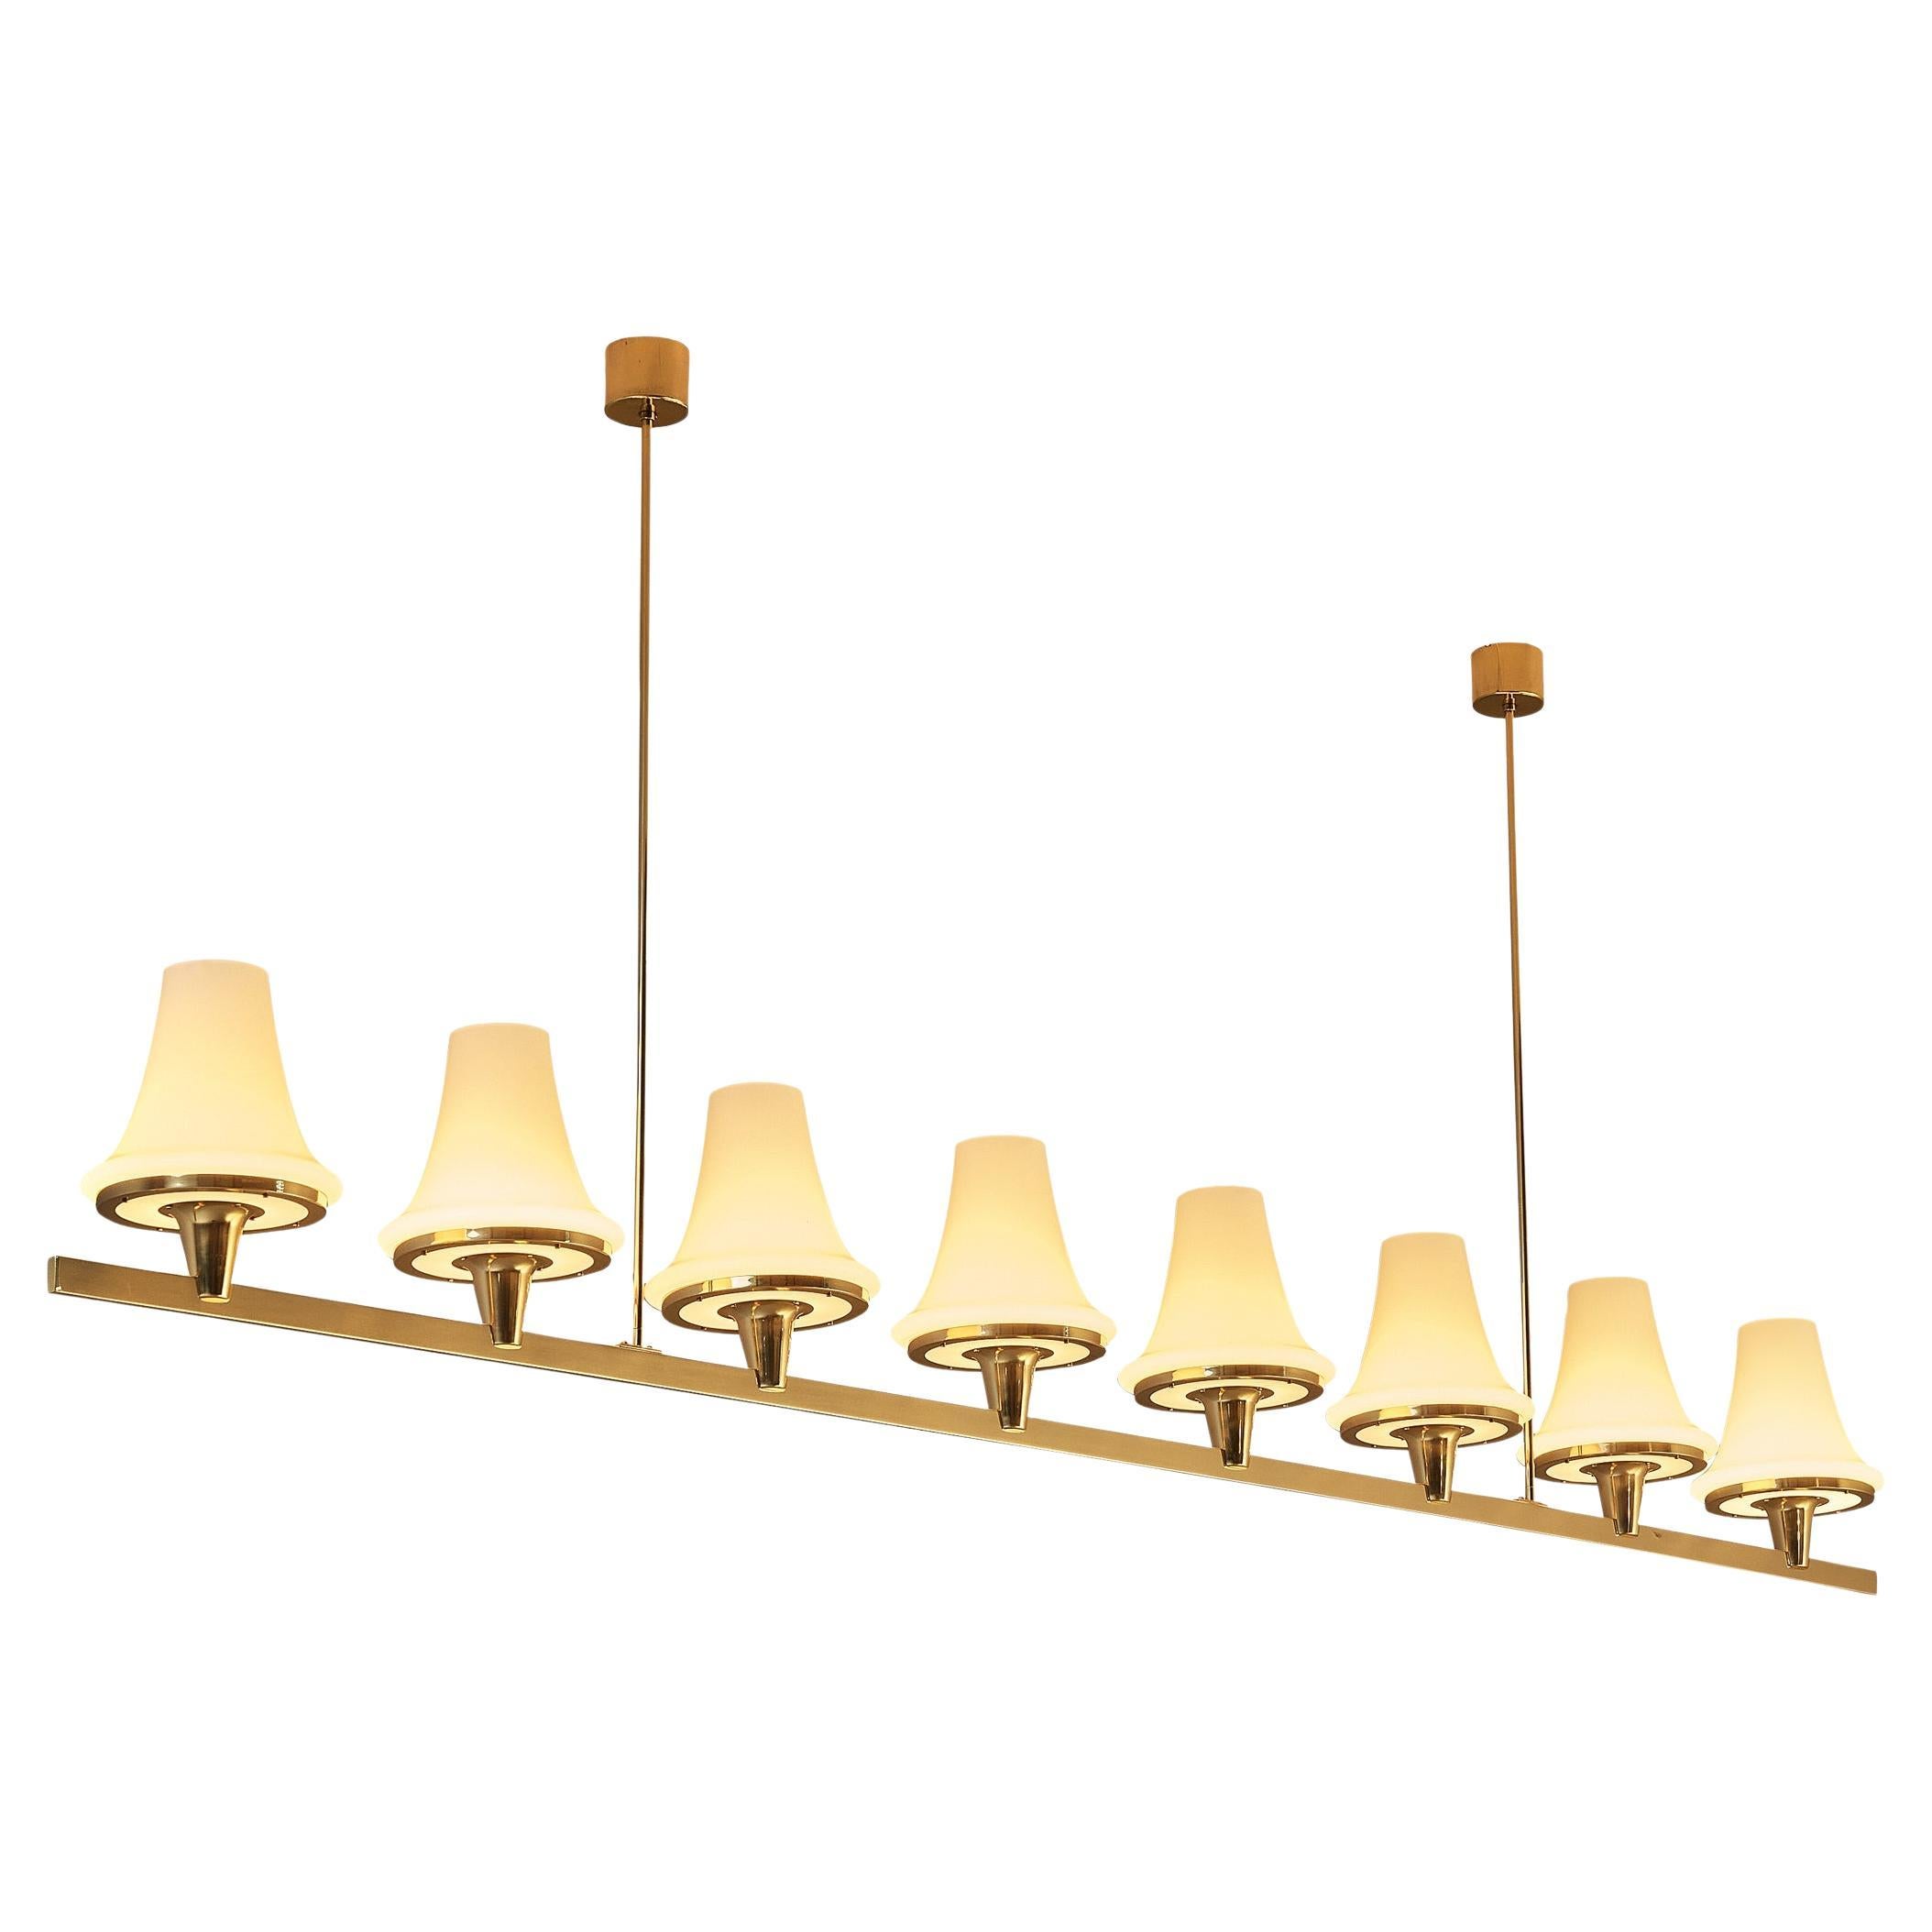 Rare Hans-Agne Jakobsson Chandelier in Brass and White Glass  For Sale